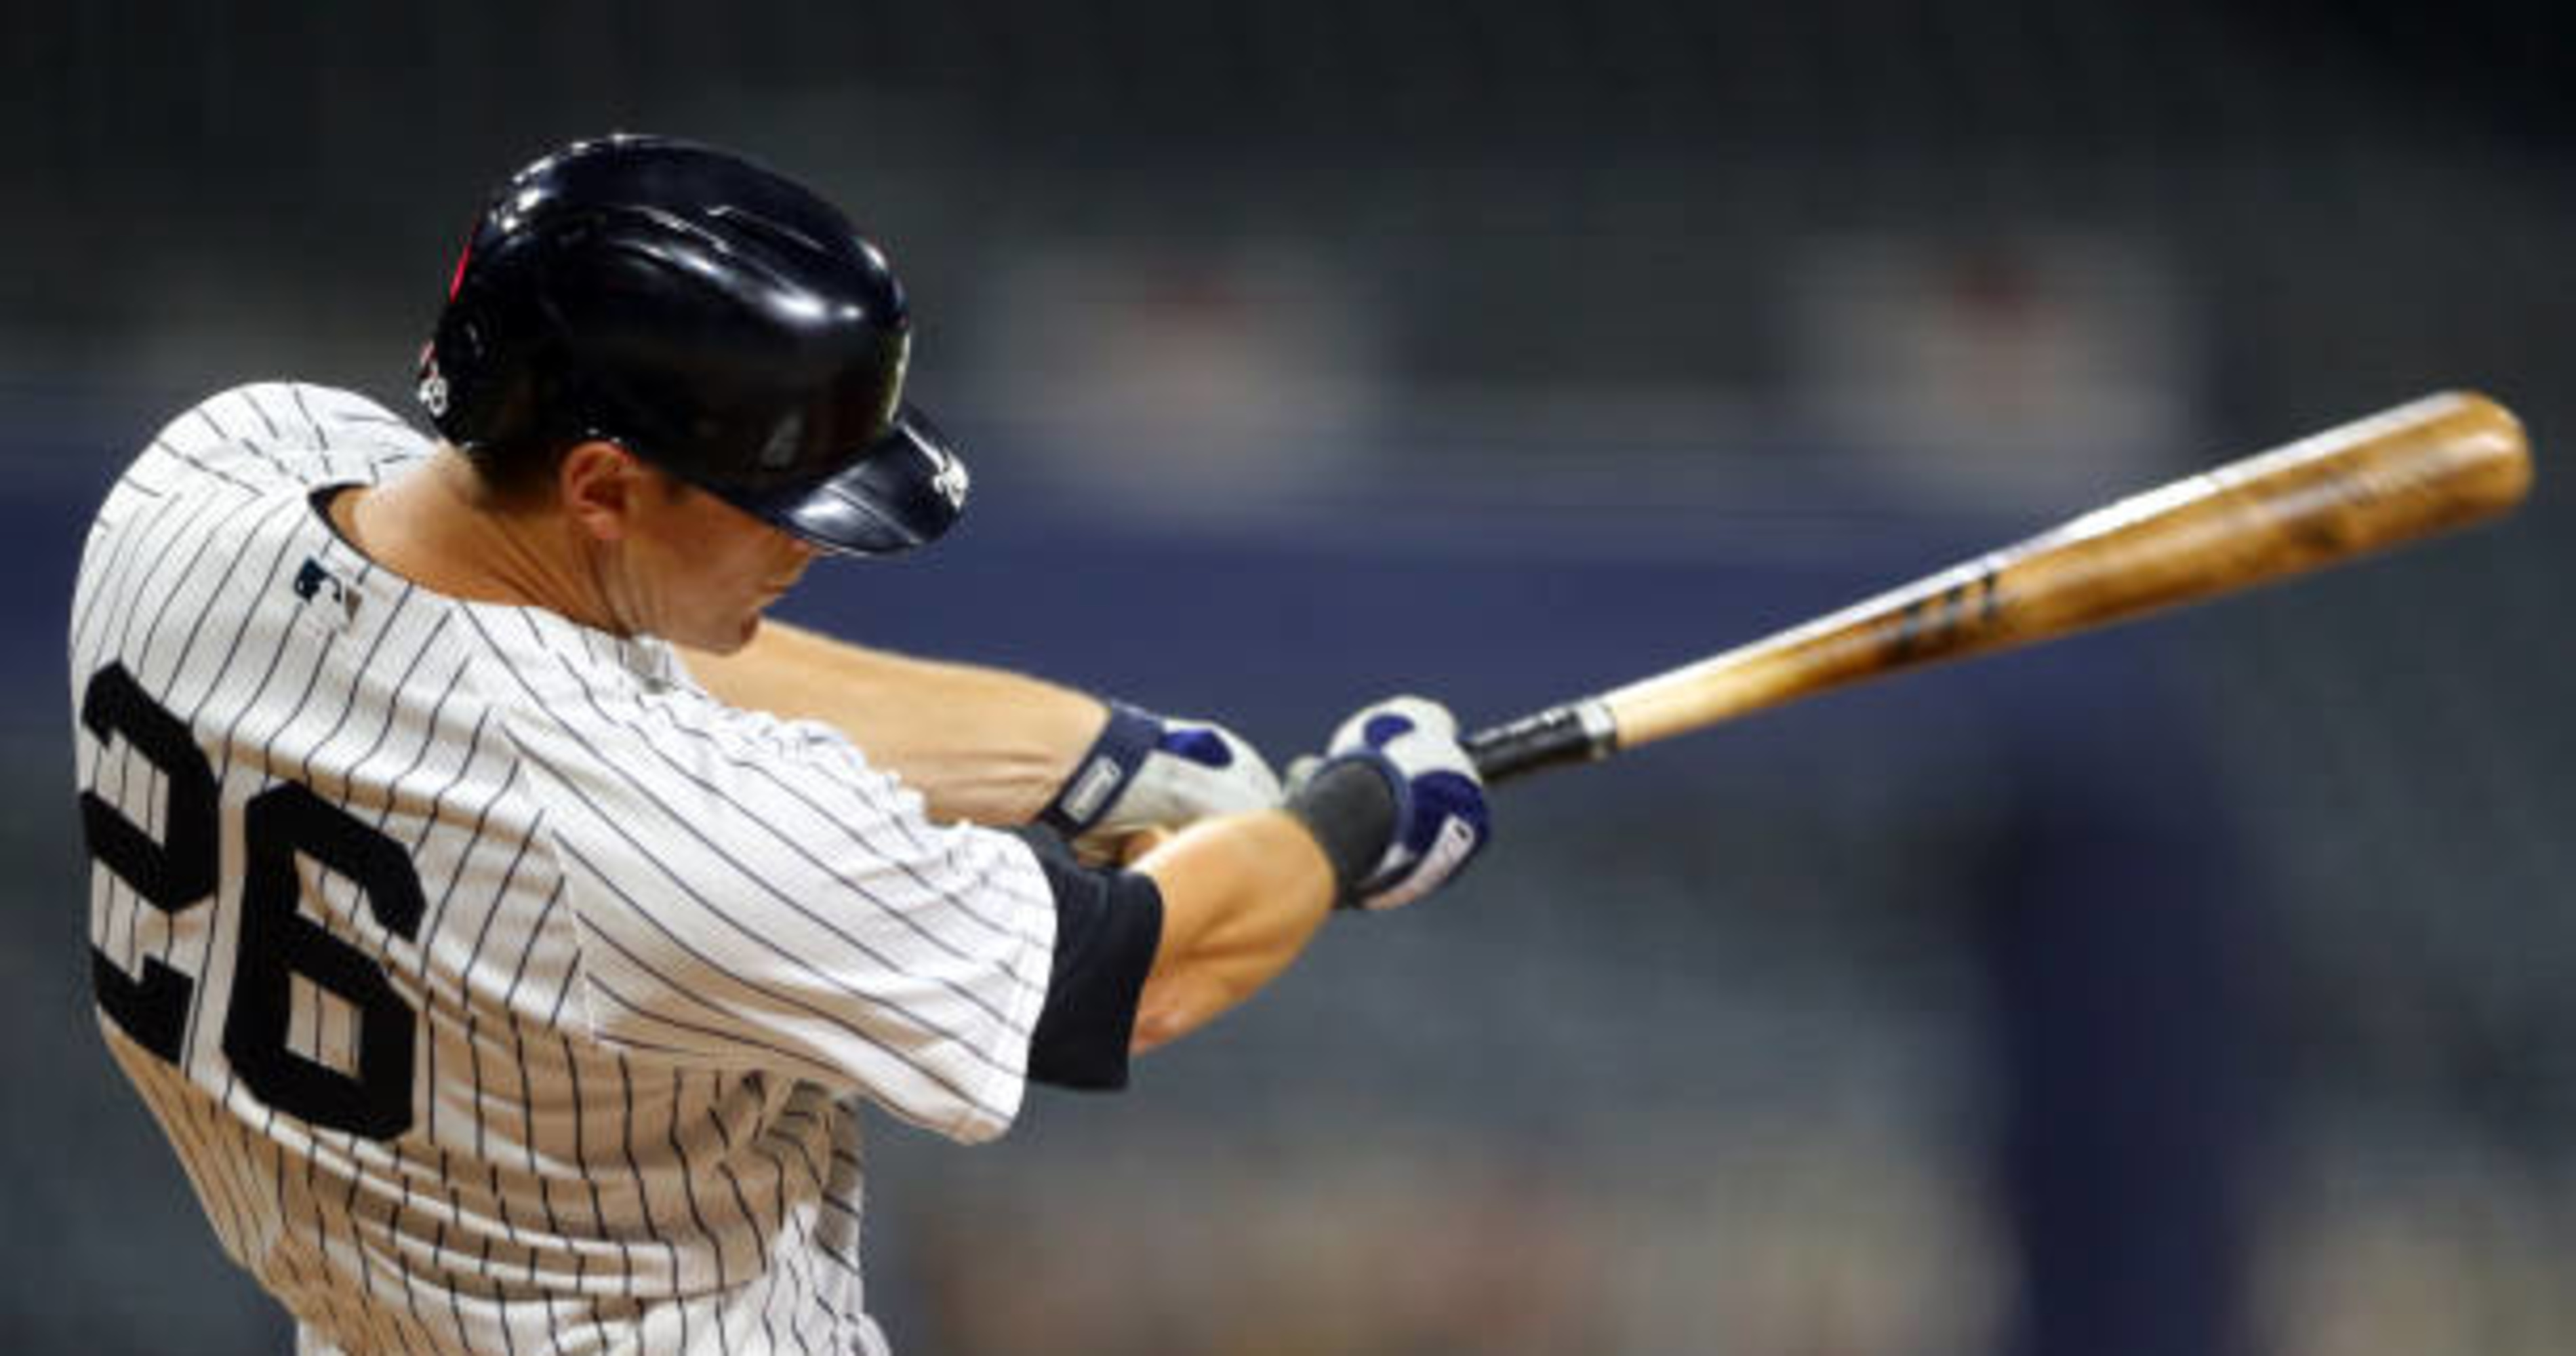 NL batting champ DJ LeMahieu trains locally, driven to hit potential